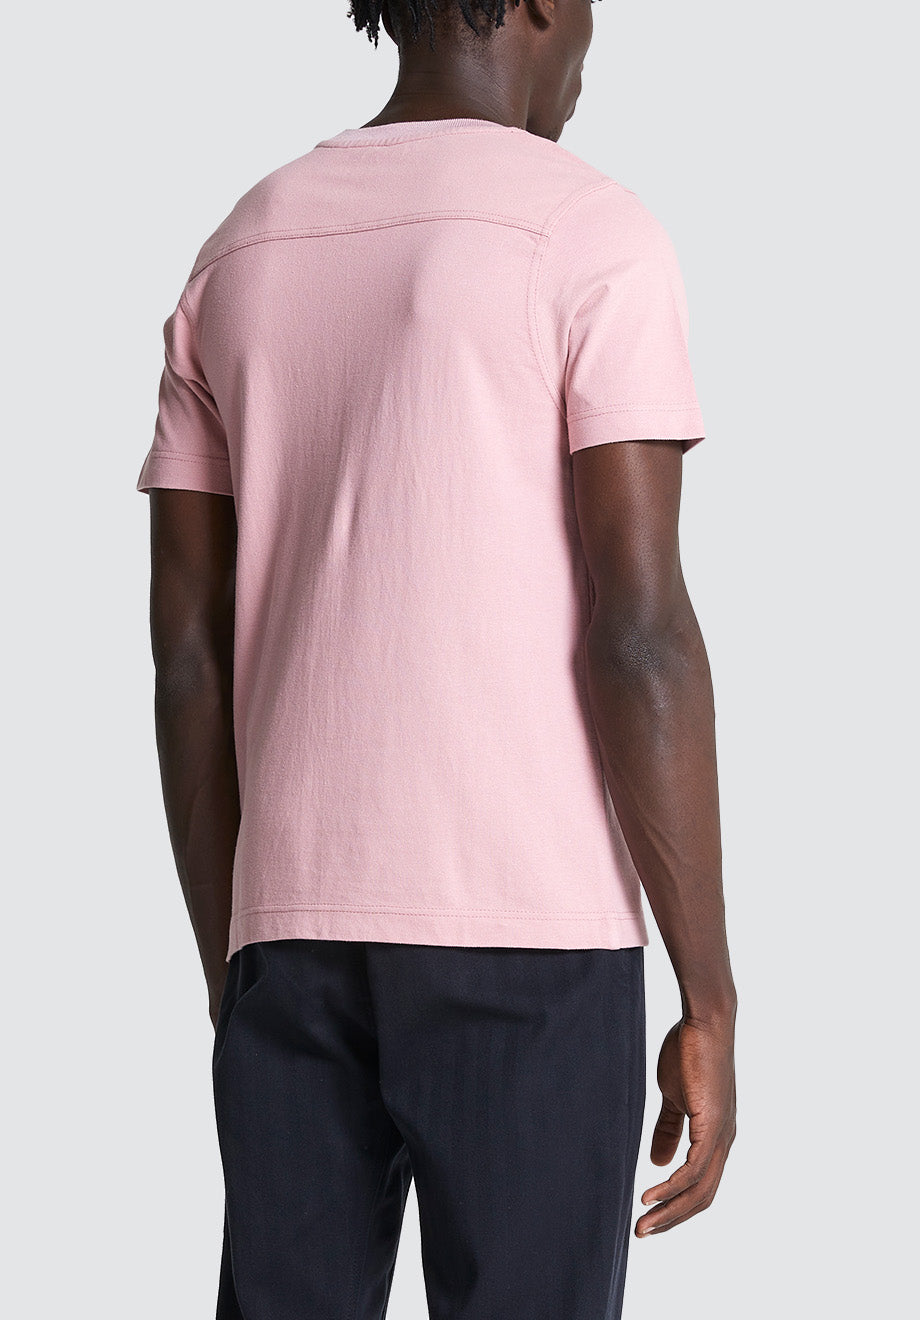 Cotton Pique Tee | Dusty Pink